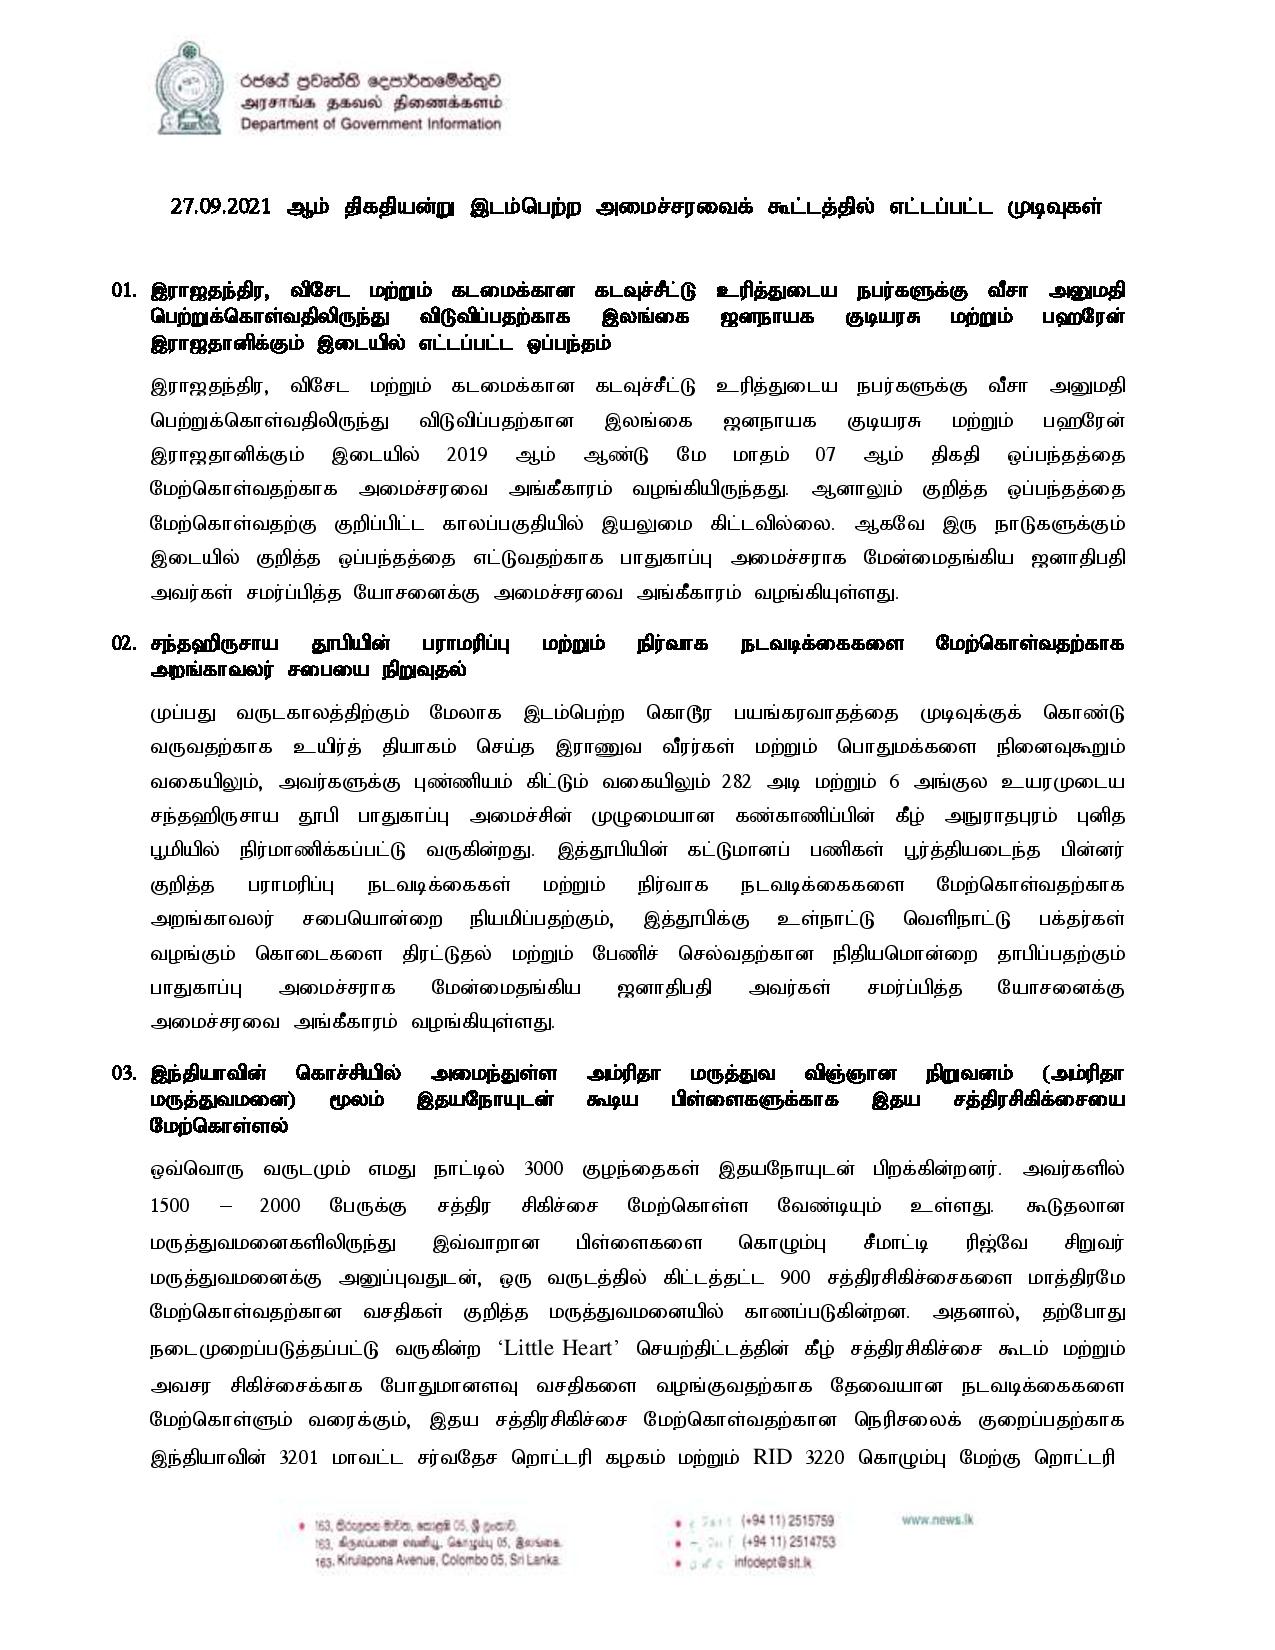 Cabinet Decisions on 27.09.2021 Tamil page 001